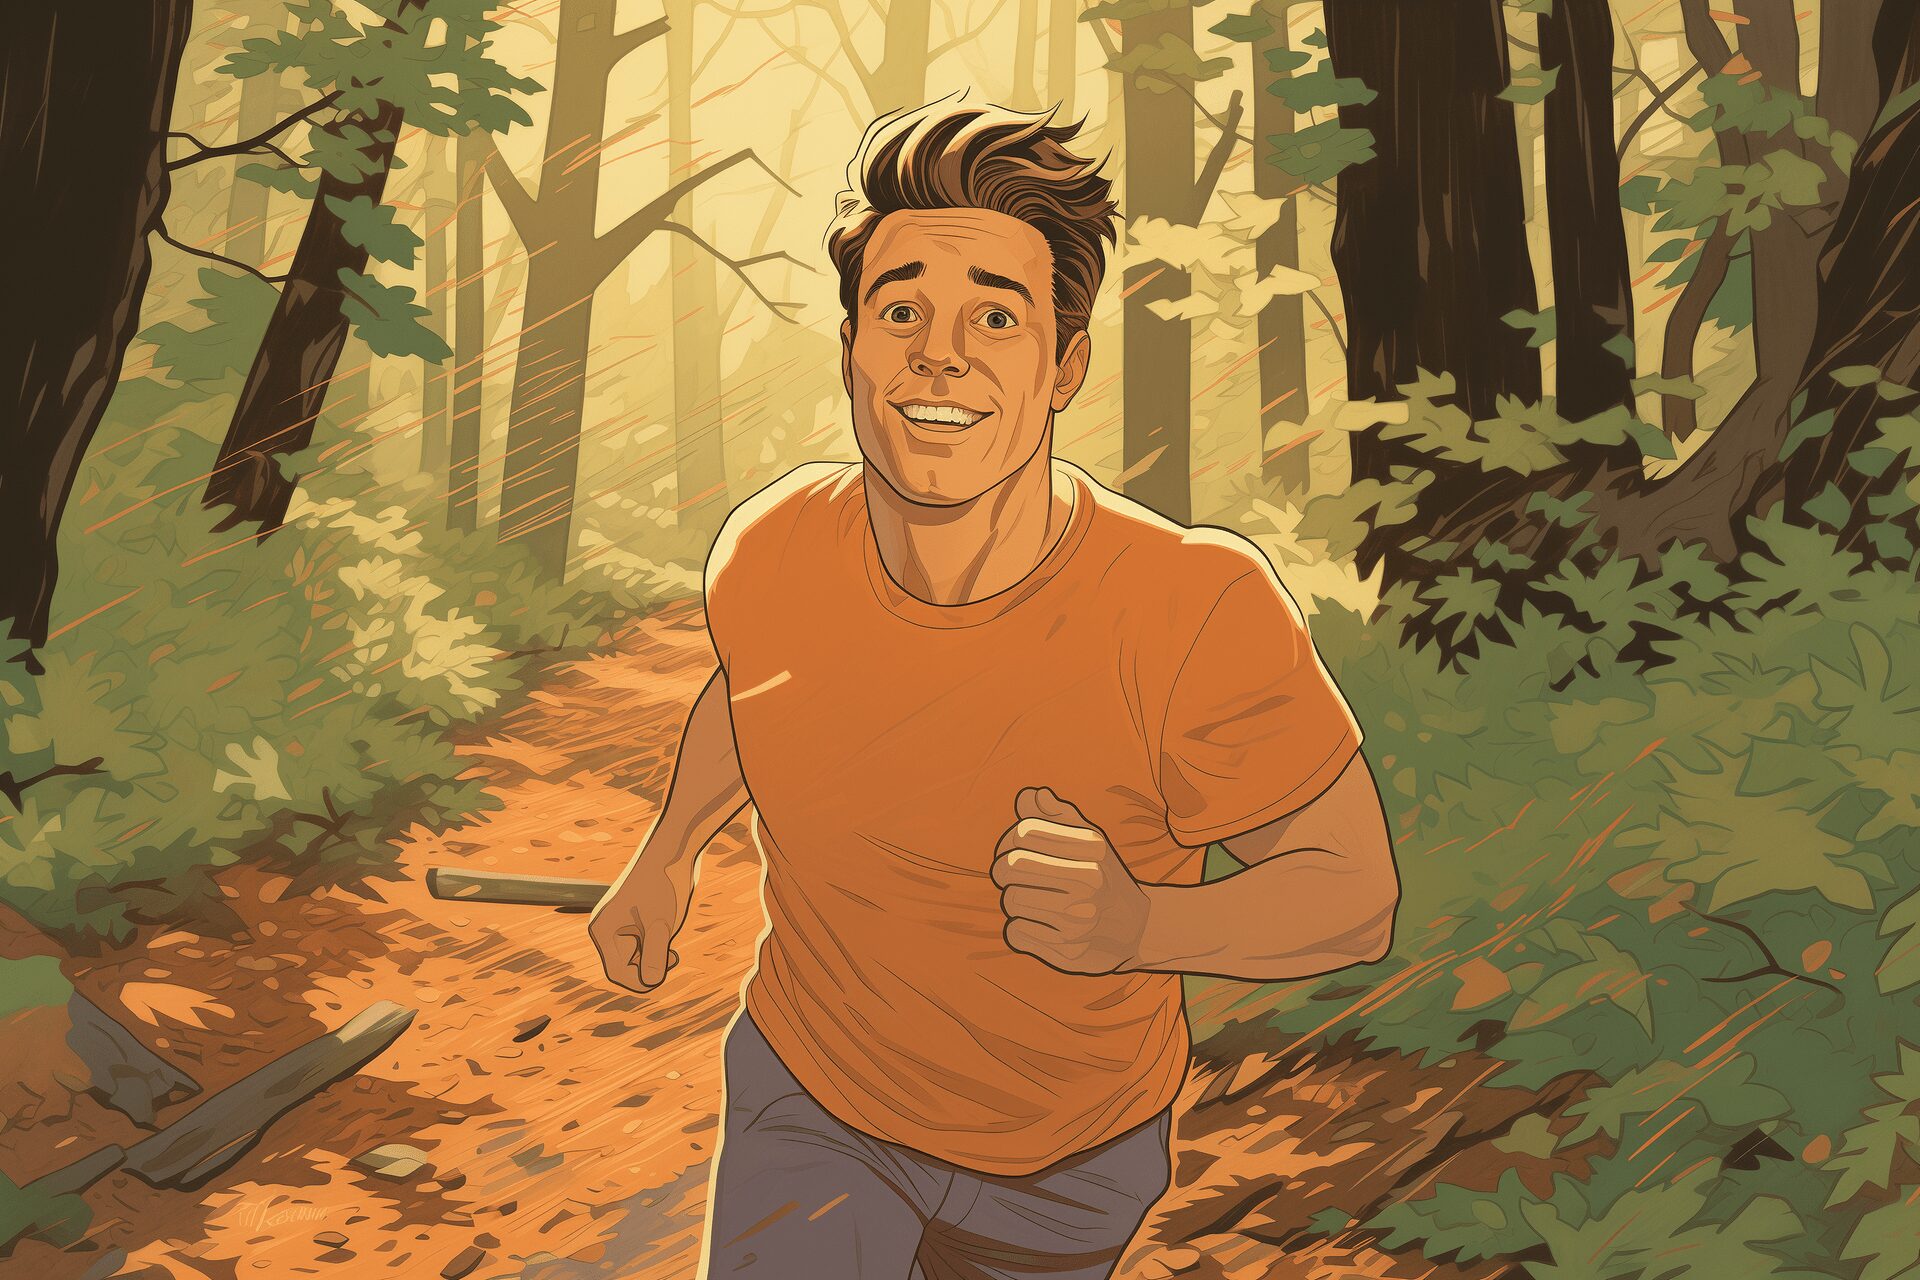 A man jogging in the woods